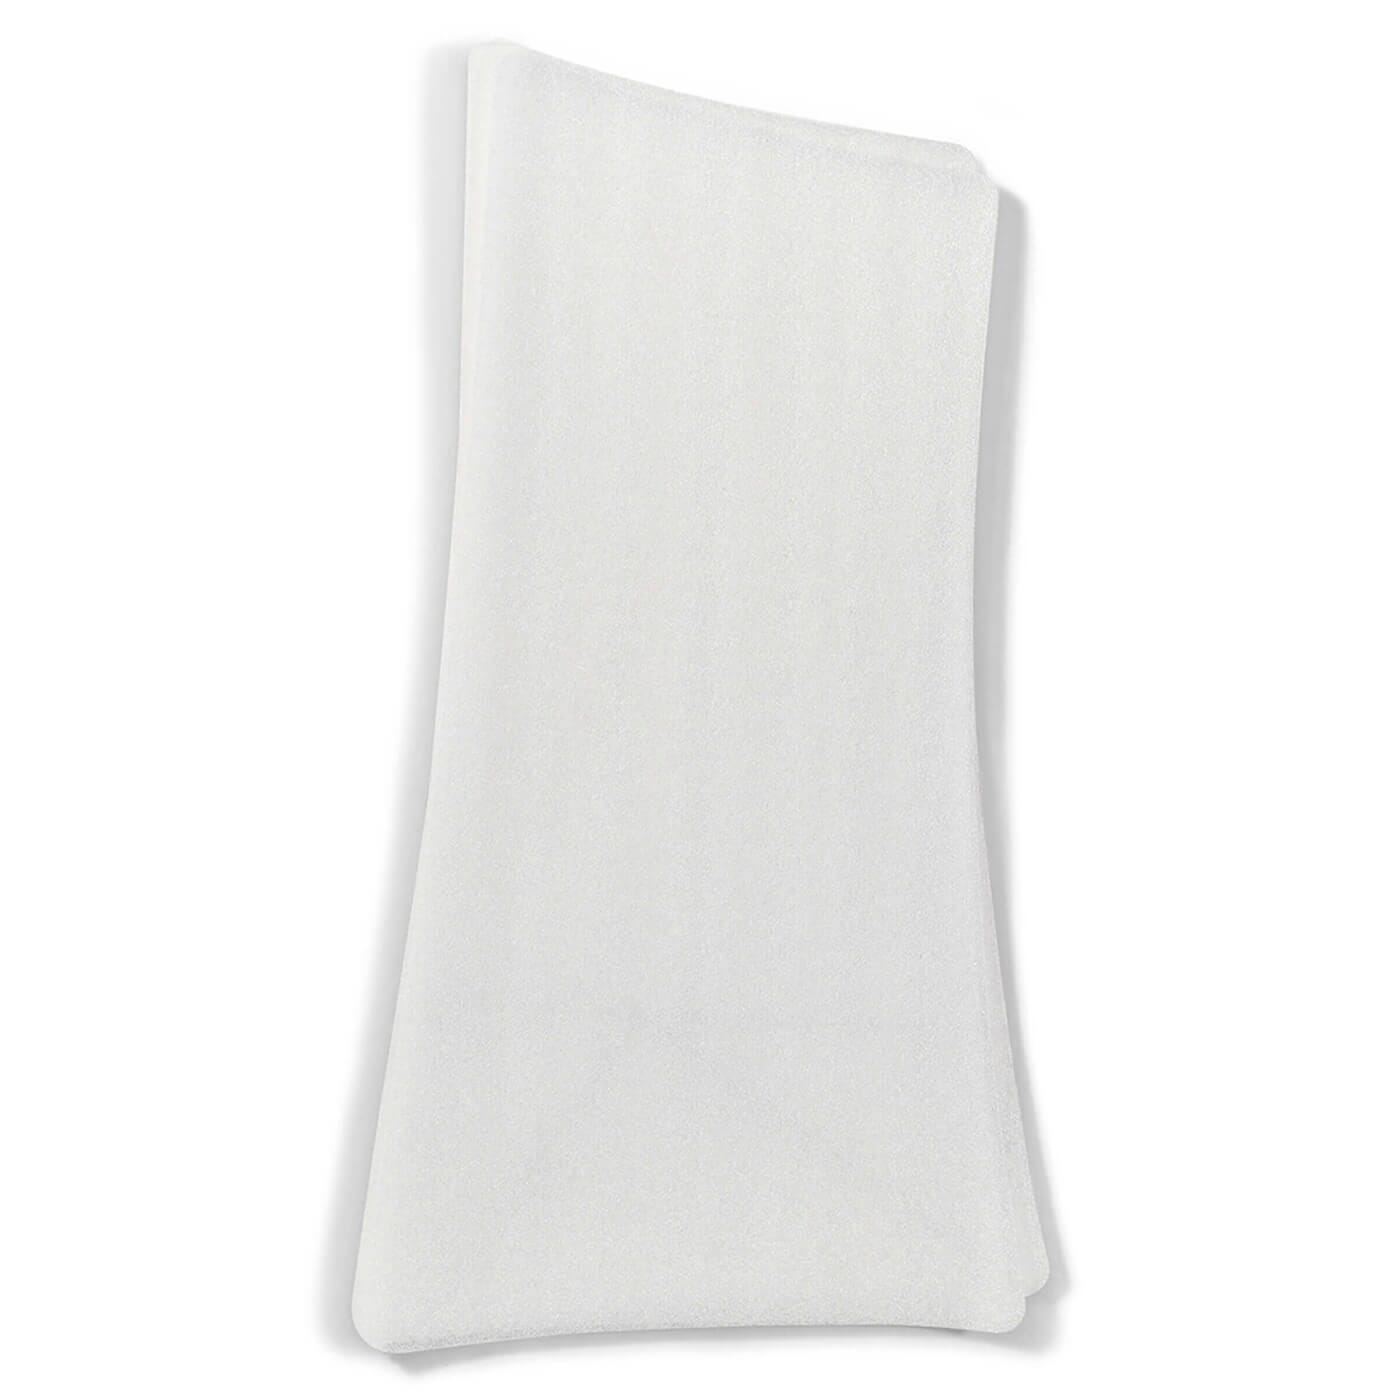 Contoured Meche Sheets | 6" x 12" | MHS-100 | Product Club HAIR COLORING ACCESSORIES PRODUCT CLUB 